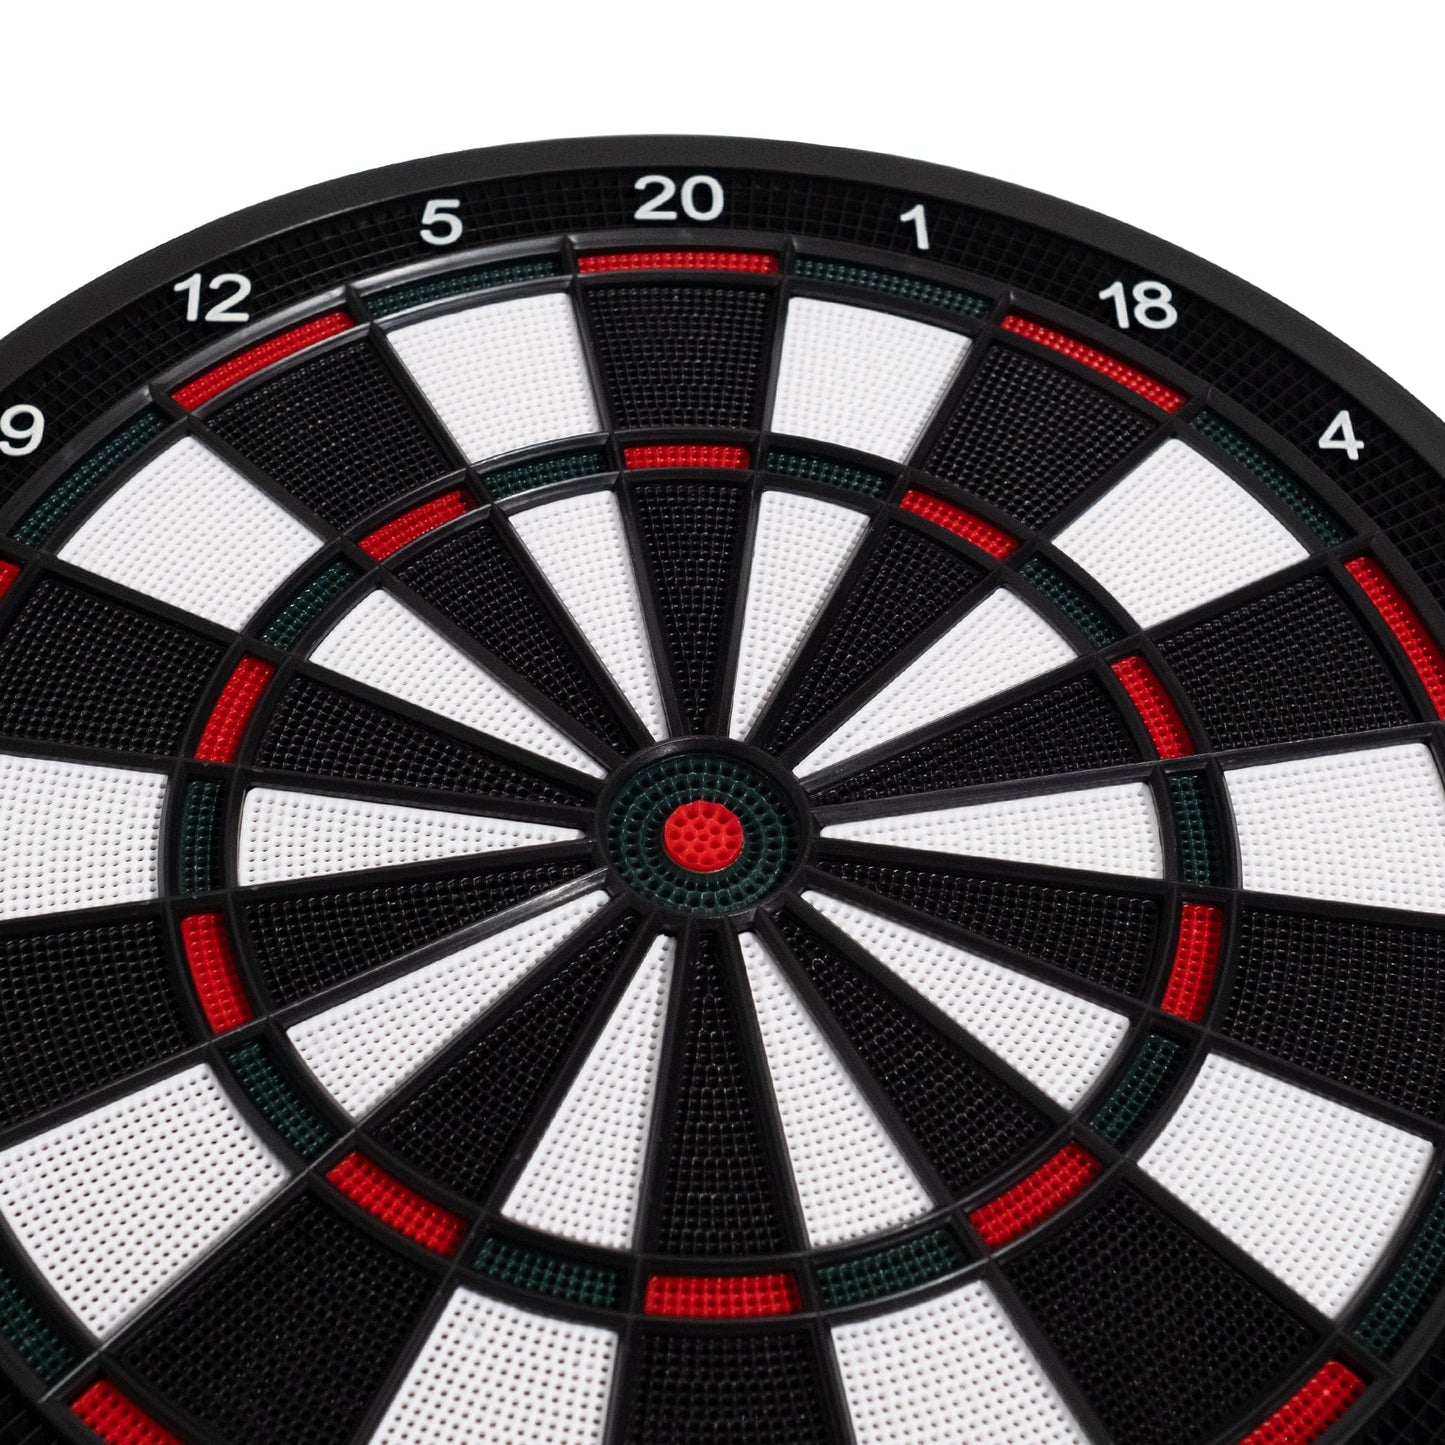 Ruthless R600 Electonic Dartboard - Soft Tip - inc 4 Sets of Darts - 8 players-27 Games